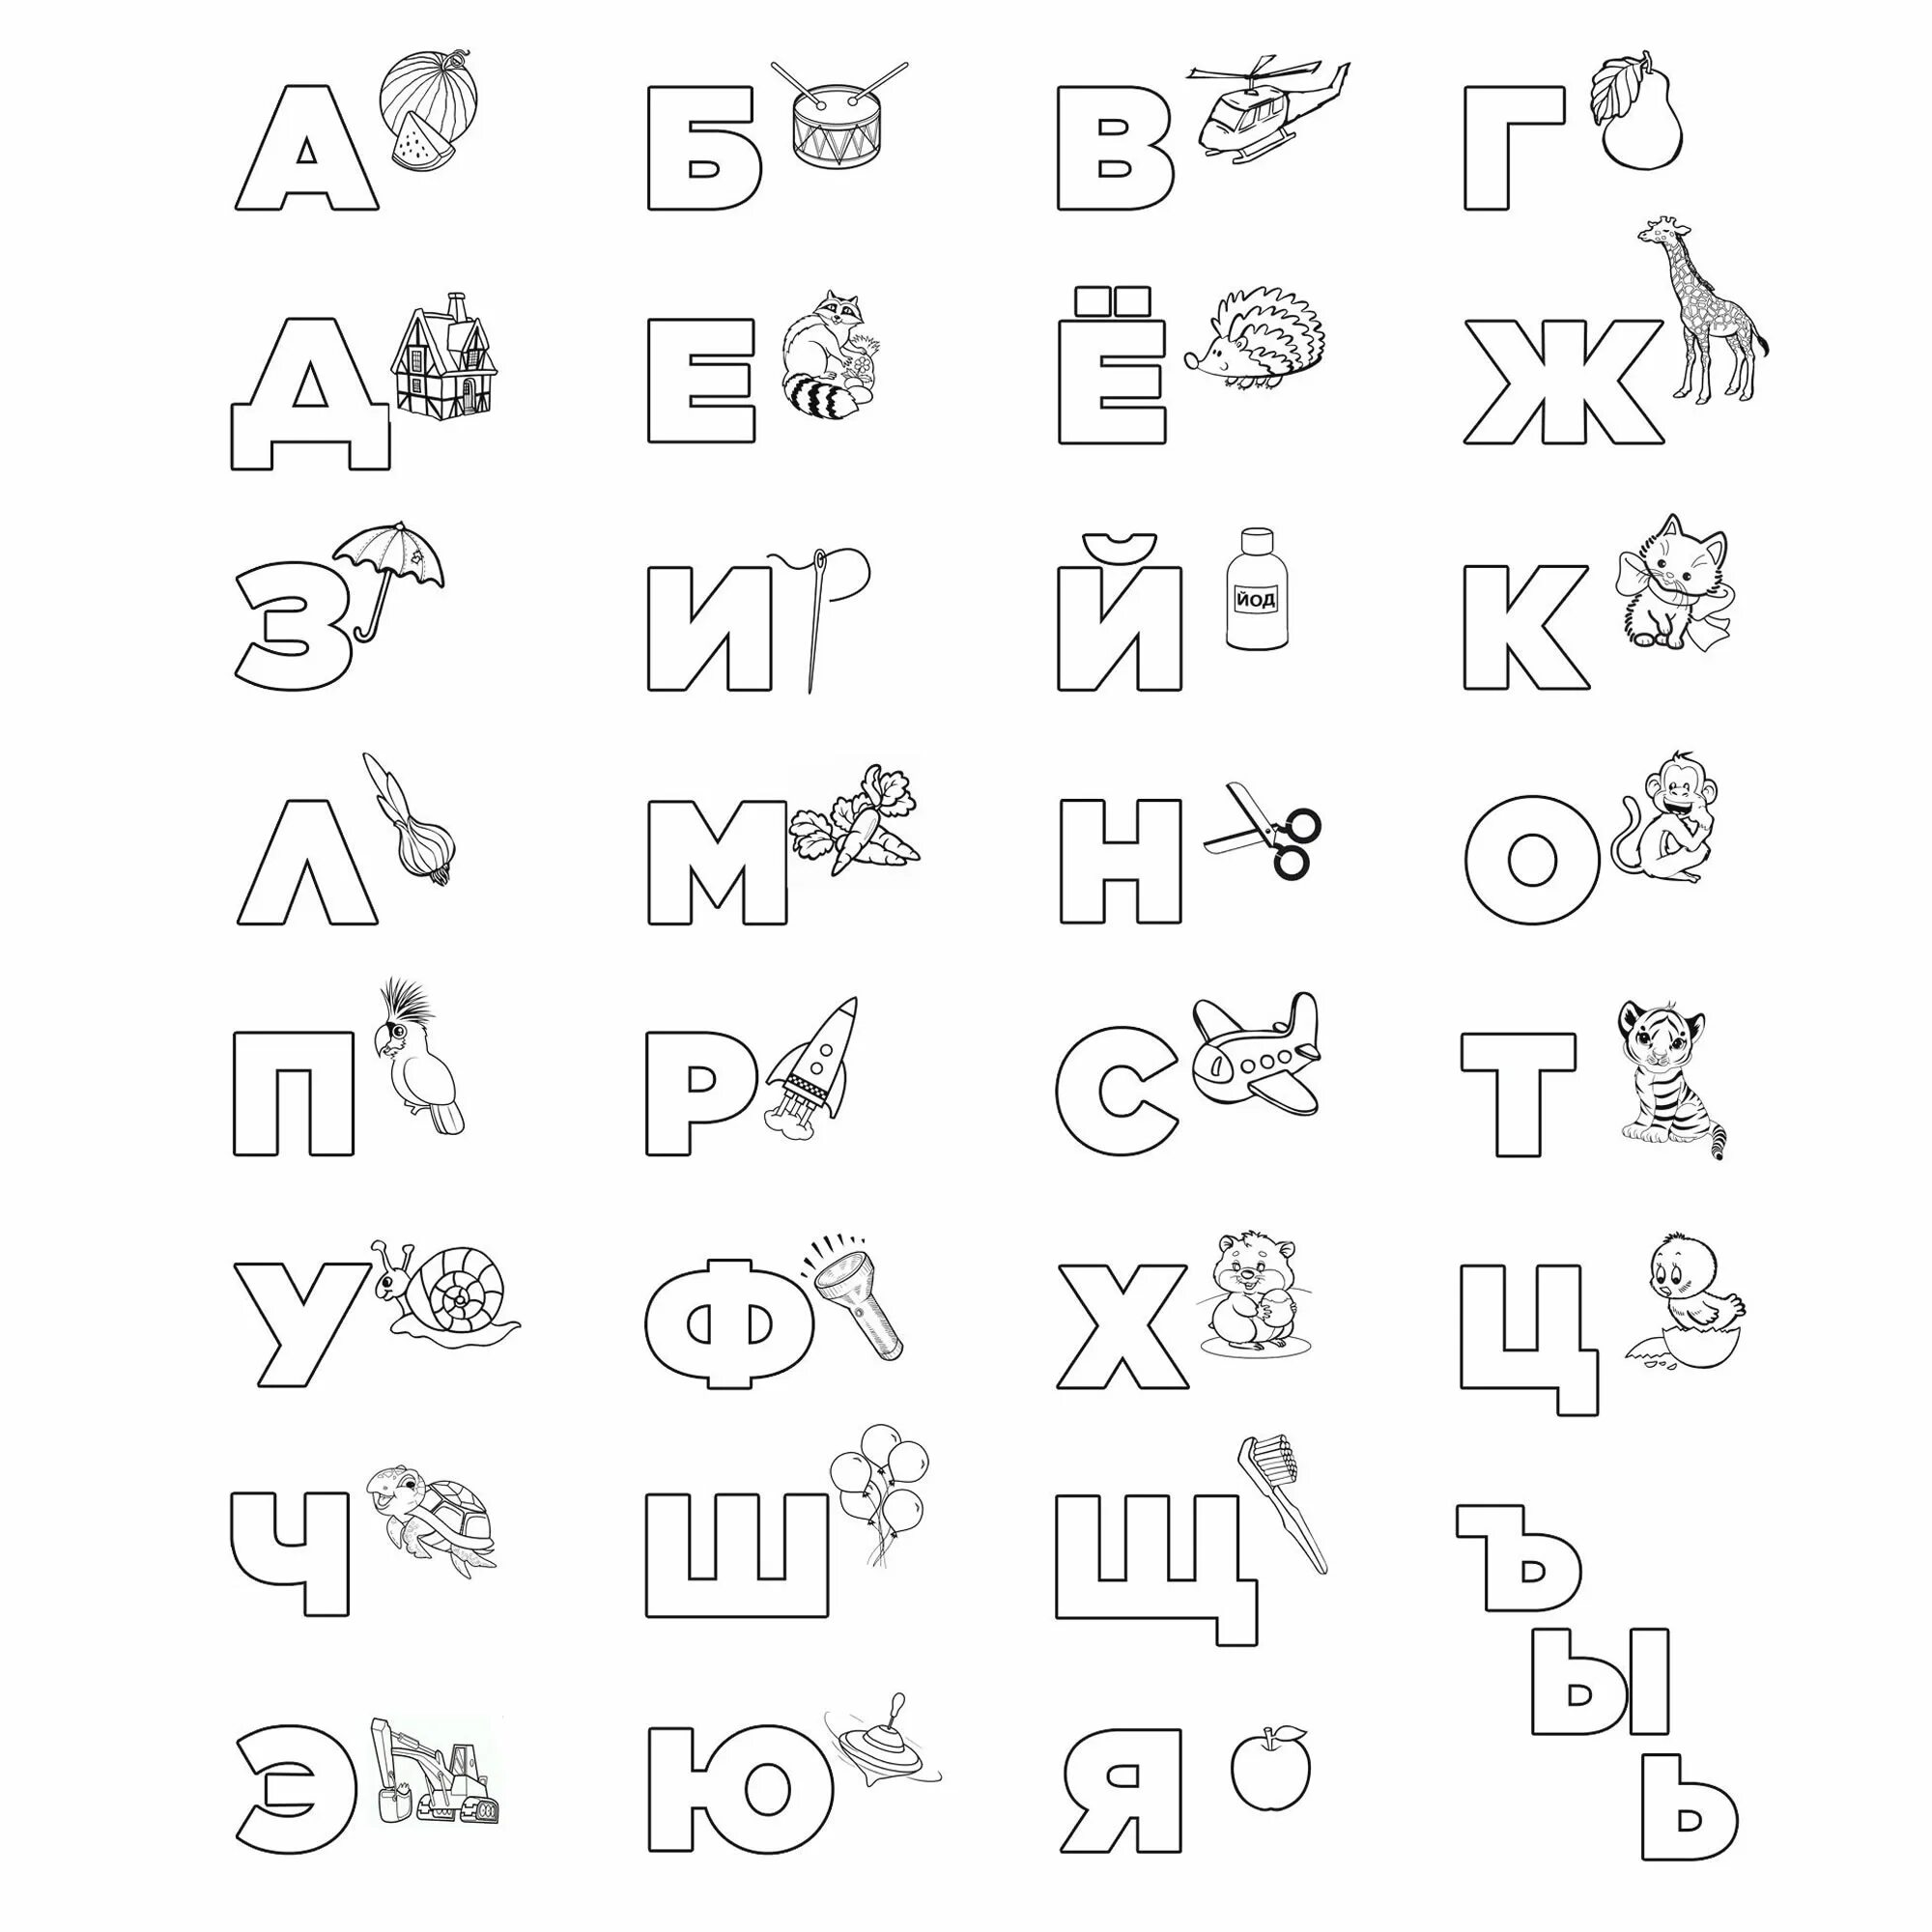 Russian printed alphabet all 33 letters #10